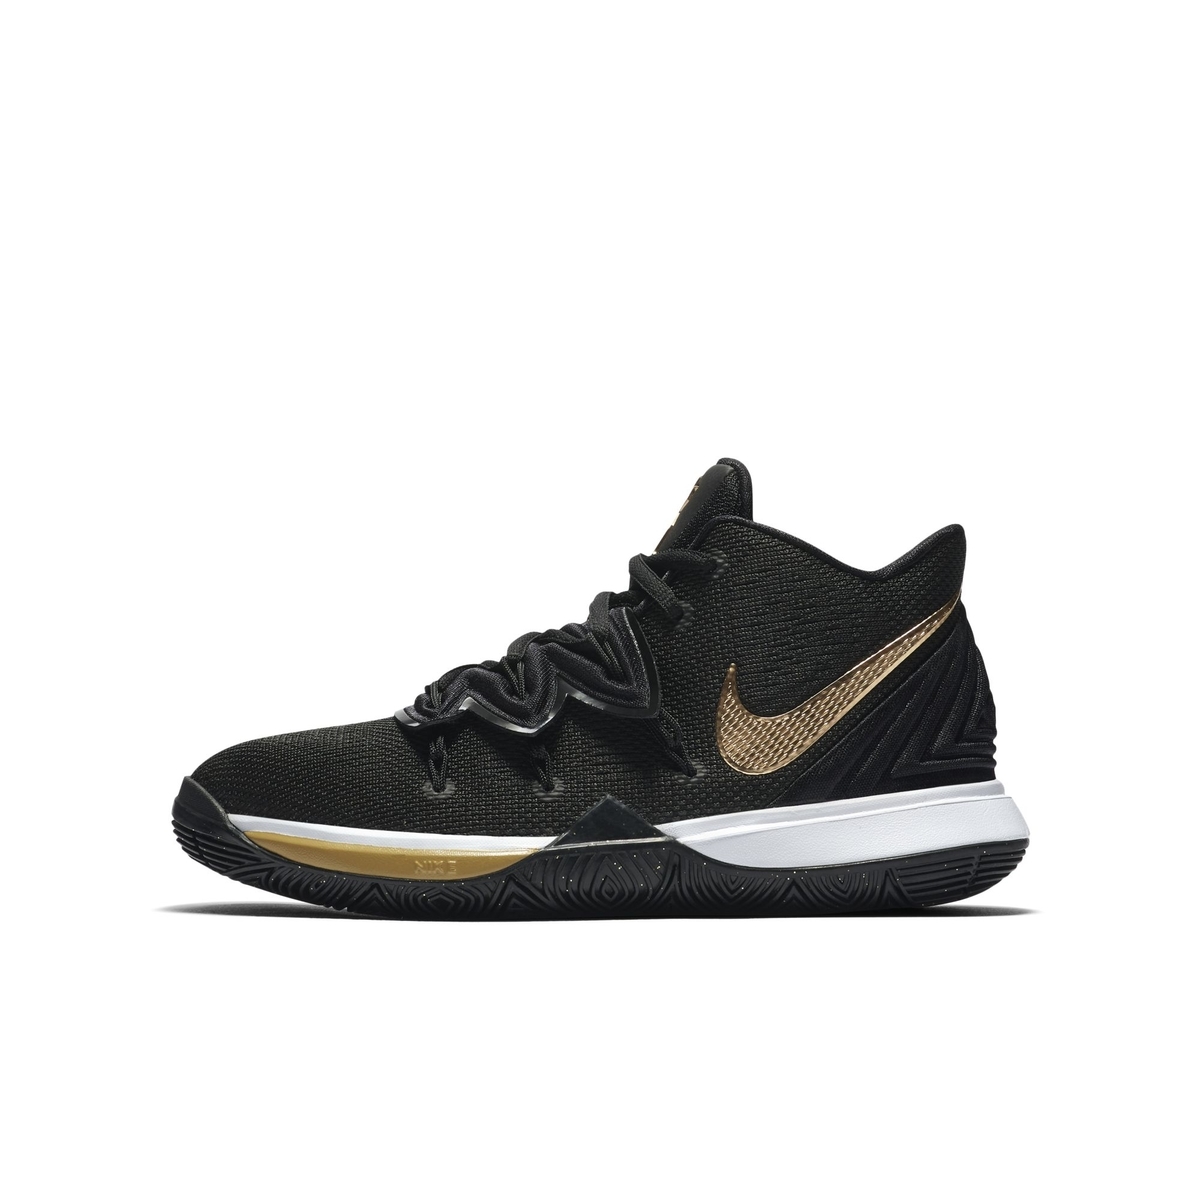 nike kyrie 5 gold